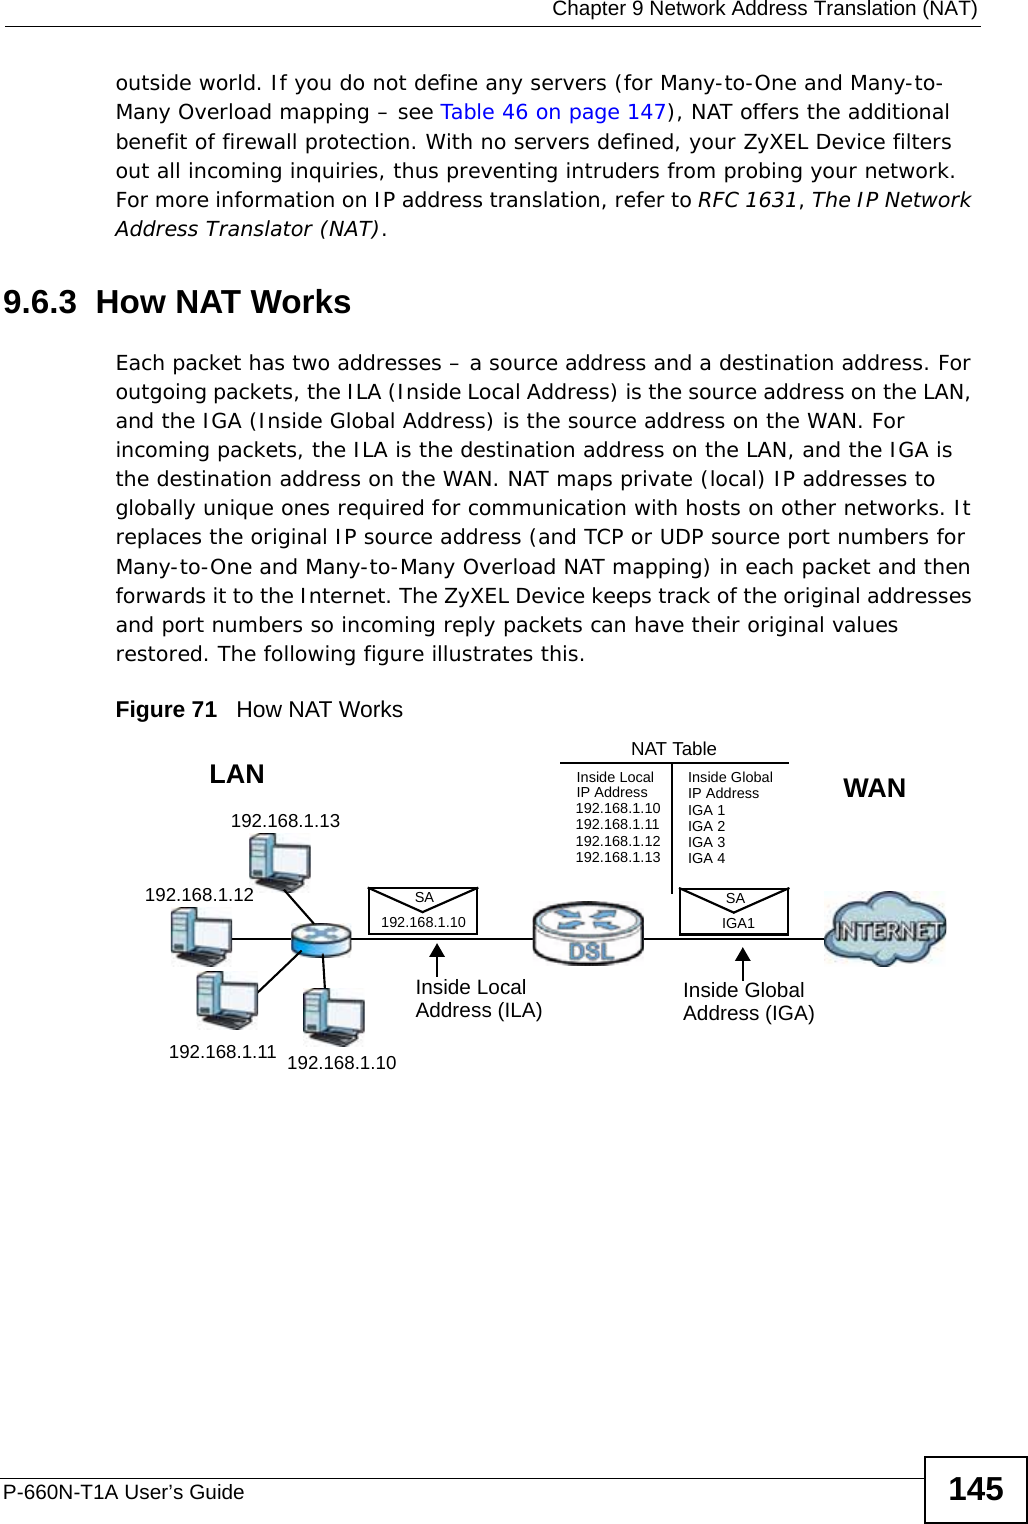  Chapter 9 Network Address Translation (NAT)P-660N-T1A User’s Guide 145outside world. If you do not define any servers (for Many-to-One and Many-to-Many Overload mapping – see Table 46 on page 147), NAT offers the additional benefit of firewall protection. With no servers defined, your ZyXEL Device filters out all incoming inquiries, thus preventing intruders from probing your network. For more information on IP address translation, refer to RFC 1631, The IP Network Address Translator (NAT).9.6.3  How NAT WorksEach packet has two addresses – a source address and a destination address. For outgoing packets, the ILA (Inside Local Address) is the source address on the LAN, and the IGA (Inside Global Address) is the source address on the WAN. For incoming packets, the ILA is the destination address on the LAN, and the IGA is the destination address on the WAN. NAT maps private (local) IP addresses to globally unique ones required for communication with hosts on other networks. It replaces the original IP source address (and TCP or UDP source port numbers for Many-to-One and Many-to-Many Overload NAT mapping) in each packet and then forwards it to the Internet. The ZyXEL Device keeps track of the original addresses and port numbers so incoming reply packets can have their original values restored. The following figure illustrates this.Figure 71   How NAT Works192.168.1.13192.168.1.10192.168.1.11192.168.1.12 SA192.168.1.10SAIGA1Inside LocalIP Address192.168.1.10192.168.1.11192.168.1.12192.168.1.13Inside Global IP AddressIGA 1IGA 2IGA 3IGA 4NAT TableWANLANInside LocalAddress (ILA) Inside GlobalAddress (IGA)